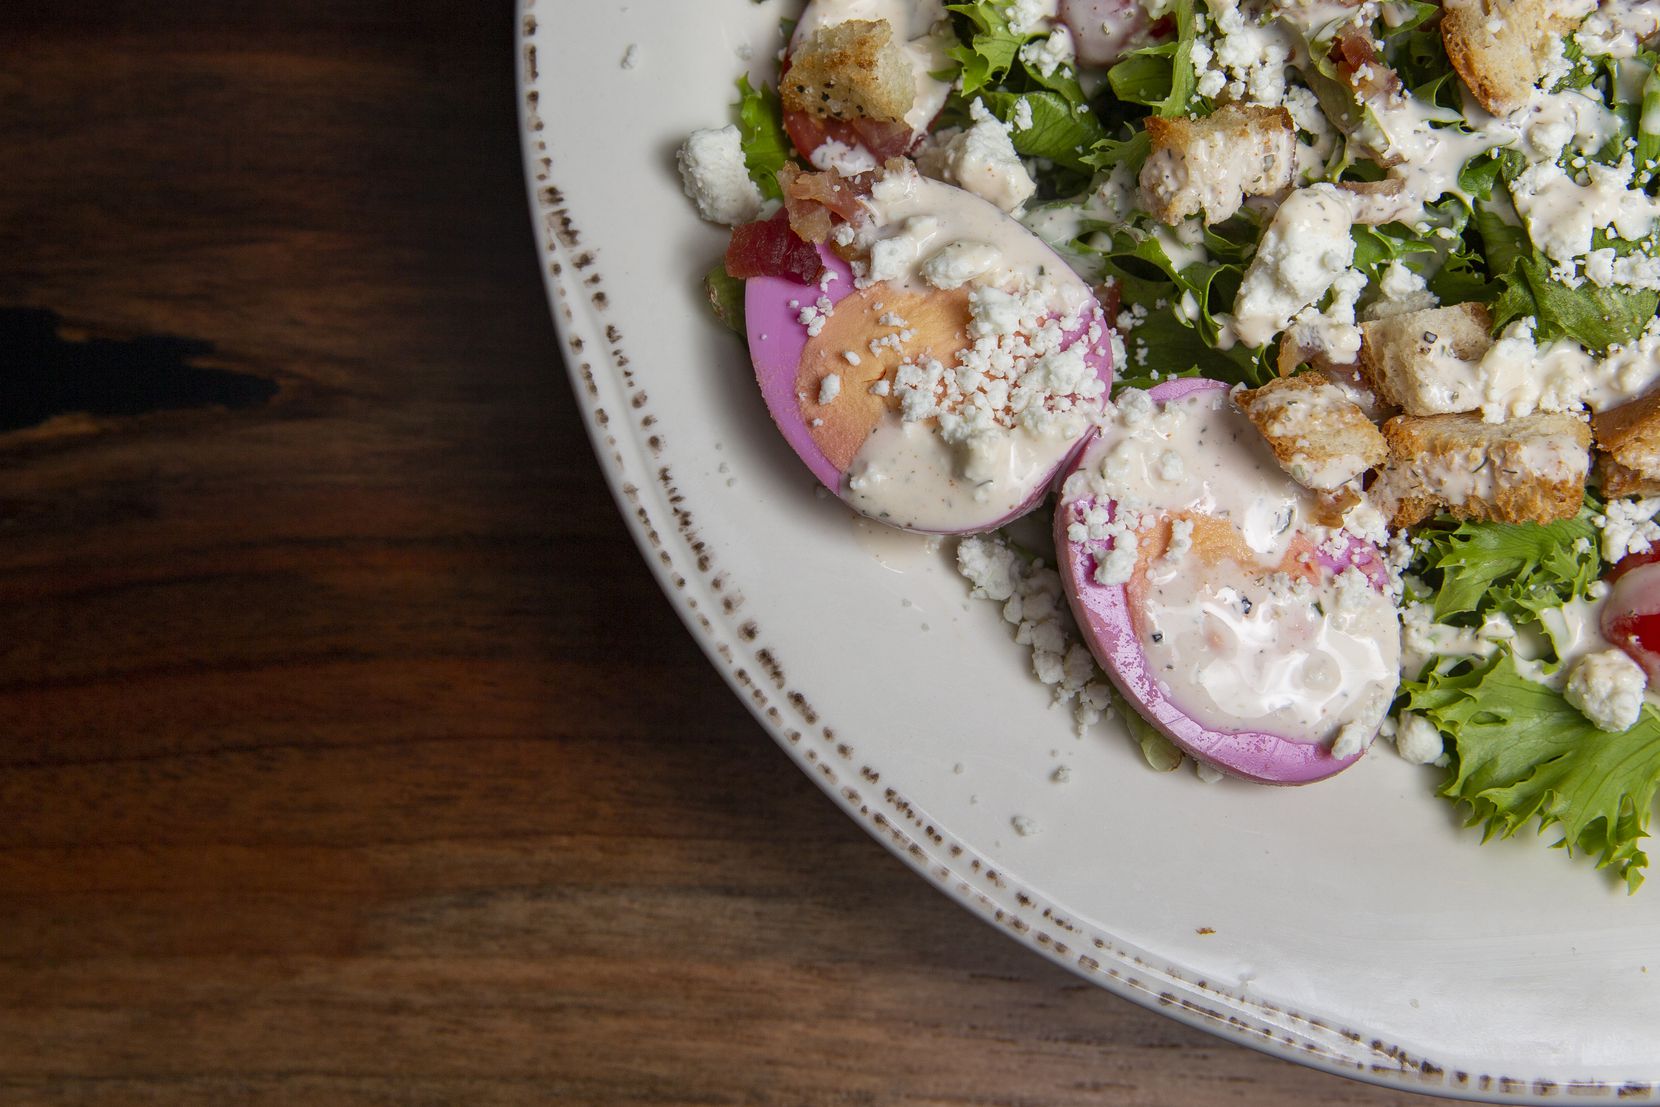 Purple pickled eggs for TCU are served with the Cobb salad as a way to honor owner Maurice...